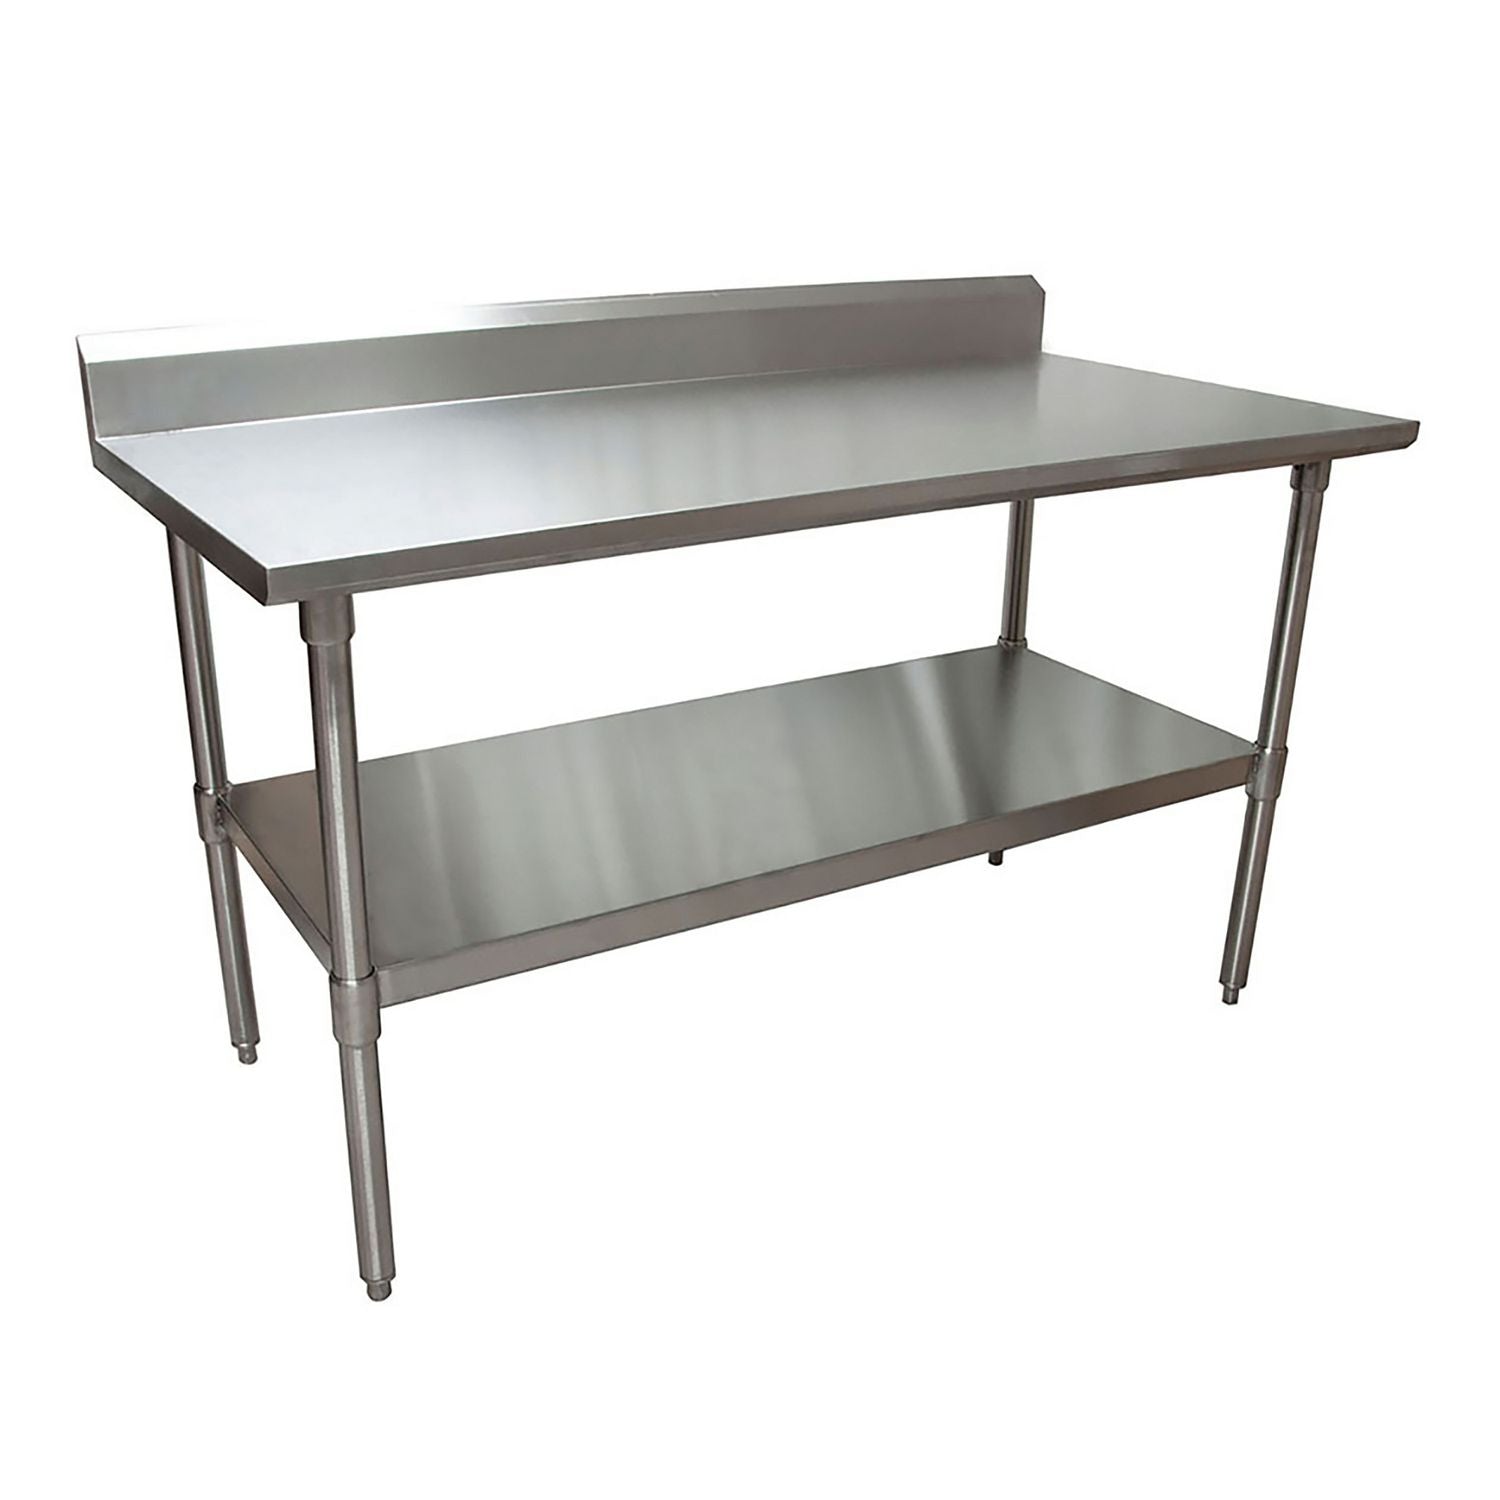 stainless-steel-5-riser-top-tables-60w-x-30d-x-3975h-silver-2-pallet-ships-in-4-6-business-days_bke2vtr56030 - 2